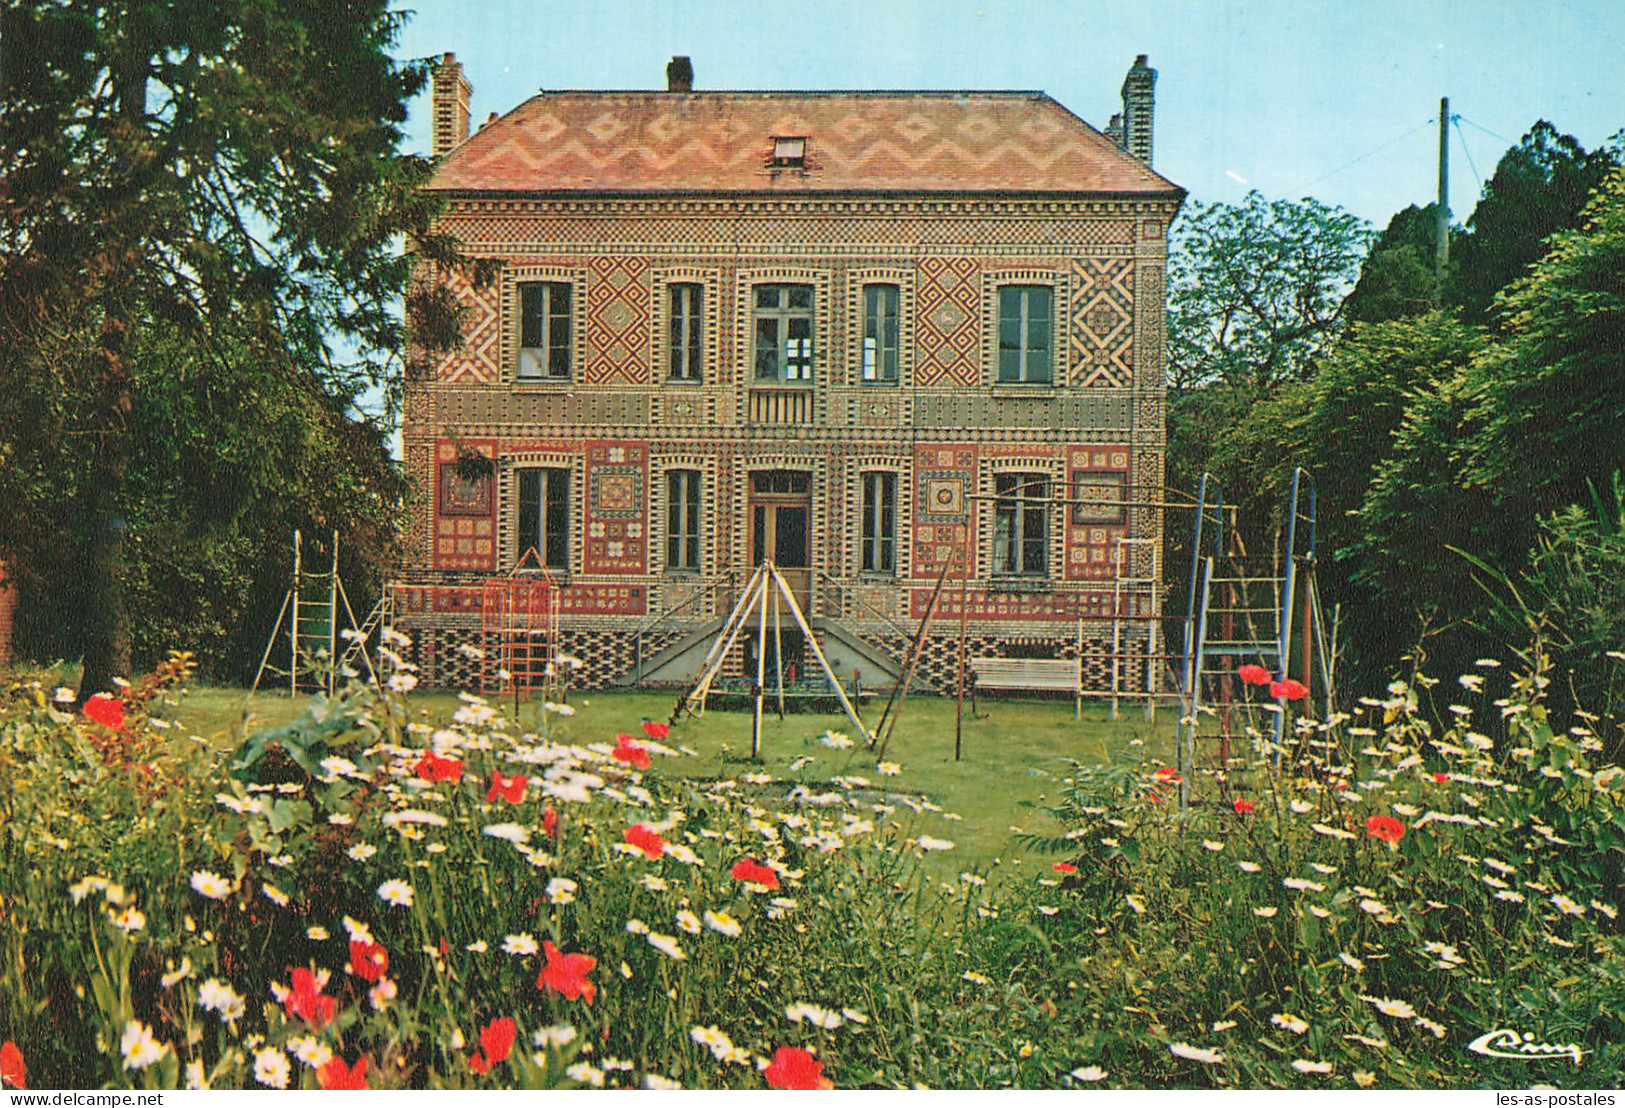 60  AUNEUIL LE MUSEE COTE JARDINS - Auneuil